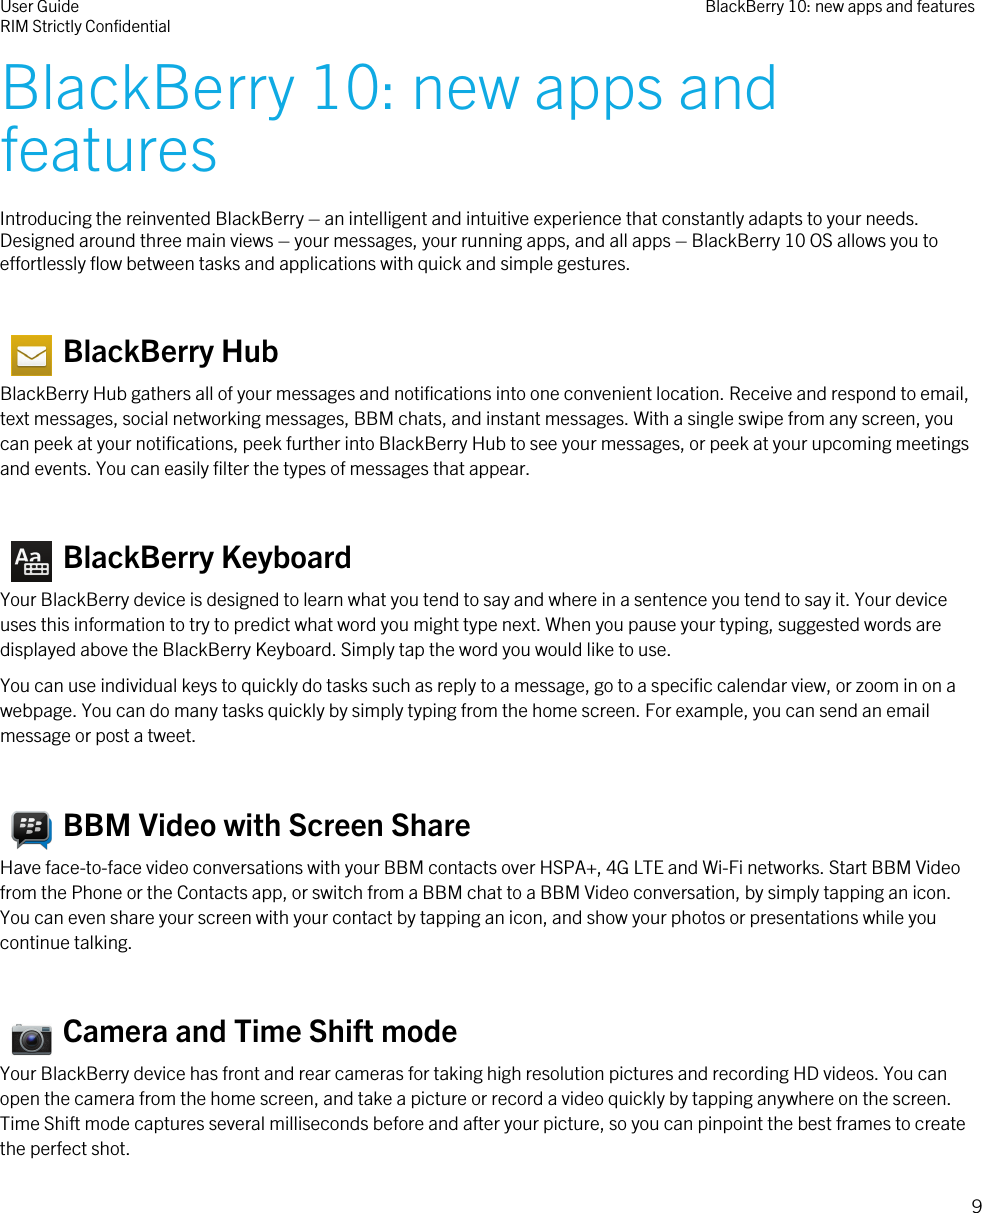 BlackBerry 10: new apps andfeaturesIntroducing the reinvented BlackBerry – an intelligent and intuitive experience that constantly adapts to your needs.Designed around three main views – your messages, your running apps, and all apps – BlackBerry 10 OS allows you toeffortlessly flow between tasks and applications with quick and simple gestures.   BlackBerry HubBlackBerry Hub gathers all of your messages and notifications into one convenient location. Receive and respond to email,text messages, social networking messages, BBM chats, and instant messages. With a single swipe from any screen, youcan peek at your notifications, peek further into BlackBerry Hub to see your messages, or peek at your upcoming meetingsand events. You can easily filter the types of messages that appear.   BlackBerry KeyboardYour BlackBerry device is designed to learn what you tend to say and where in a sentence you tend to say it. Your deviceuses this information to try to predict what word you might type next. When you pause your typing, suggested words aredisplayed above the BlackBerry Keyboard. Simply tap the word you would like to use.You can use individual keys to quickly do tasks such as reply to a message, go to a specific calendar view, or zoom in on awebpage. You can do many tasks quickly by simply typing from the home screen. For example, you can send an emailmessage or post a tweet.  BBM Video with Screen ShareHave face-to-face video conversations with your BBM contacts over HSPA+, 4G LTE and Wi-Fi networks. Start BBM Videofrom the Phone or the Contacts app, or switch from a BBM chat to a BBM Video conversation, by simply tapping an icon.You can even share your screen with your contact by tapping an icon, and show your photos or presentations while youcontinue talking.   Camera and Time Shift modeYour BlackBerry device has front and rear cameras for taking high resolution pictures and recording HD videos. You canopen the camera from the home screen, and take a picture or record a video quickly by tapping anywhere on the screen.Time Shift mode captures several milliseconds before and after your picture, so you can pinpoint the best frames to createthe perfect shot.User GuideRIM Strictly Confidential BlackBerry 10: new apps and features9